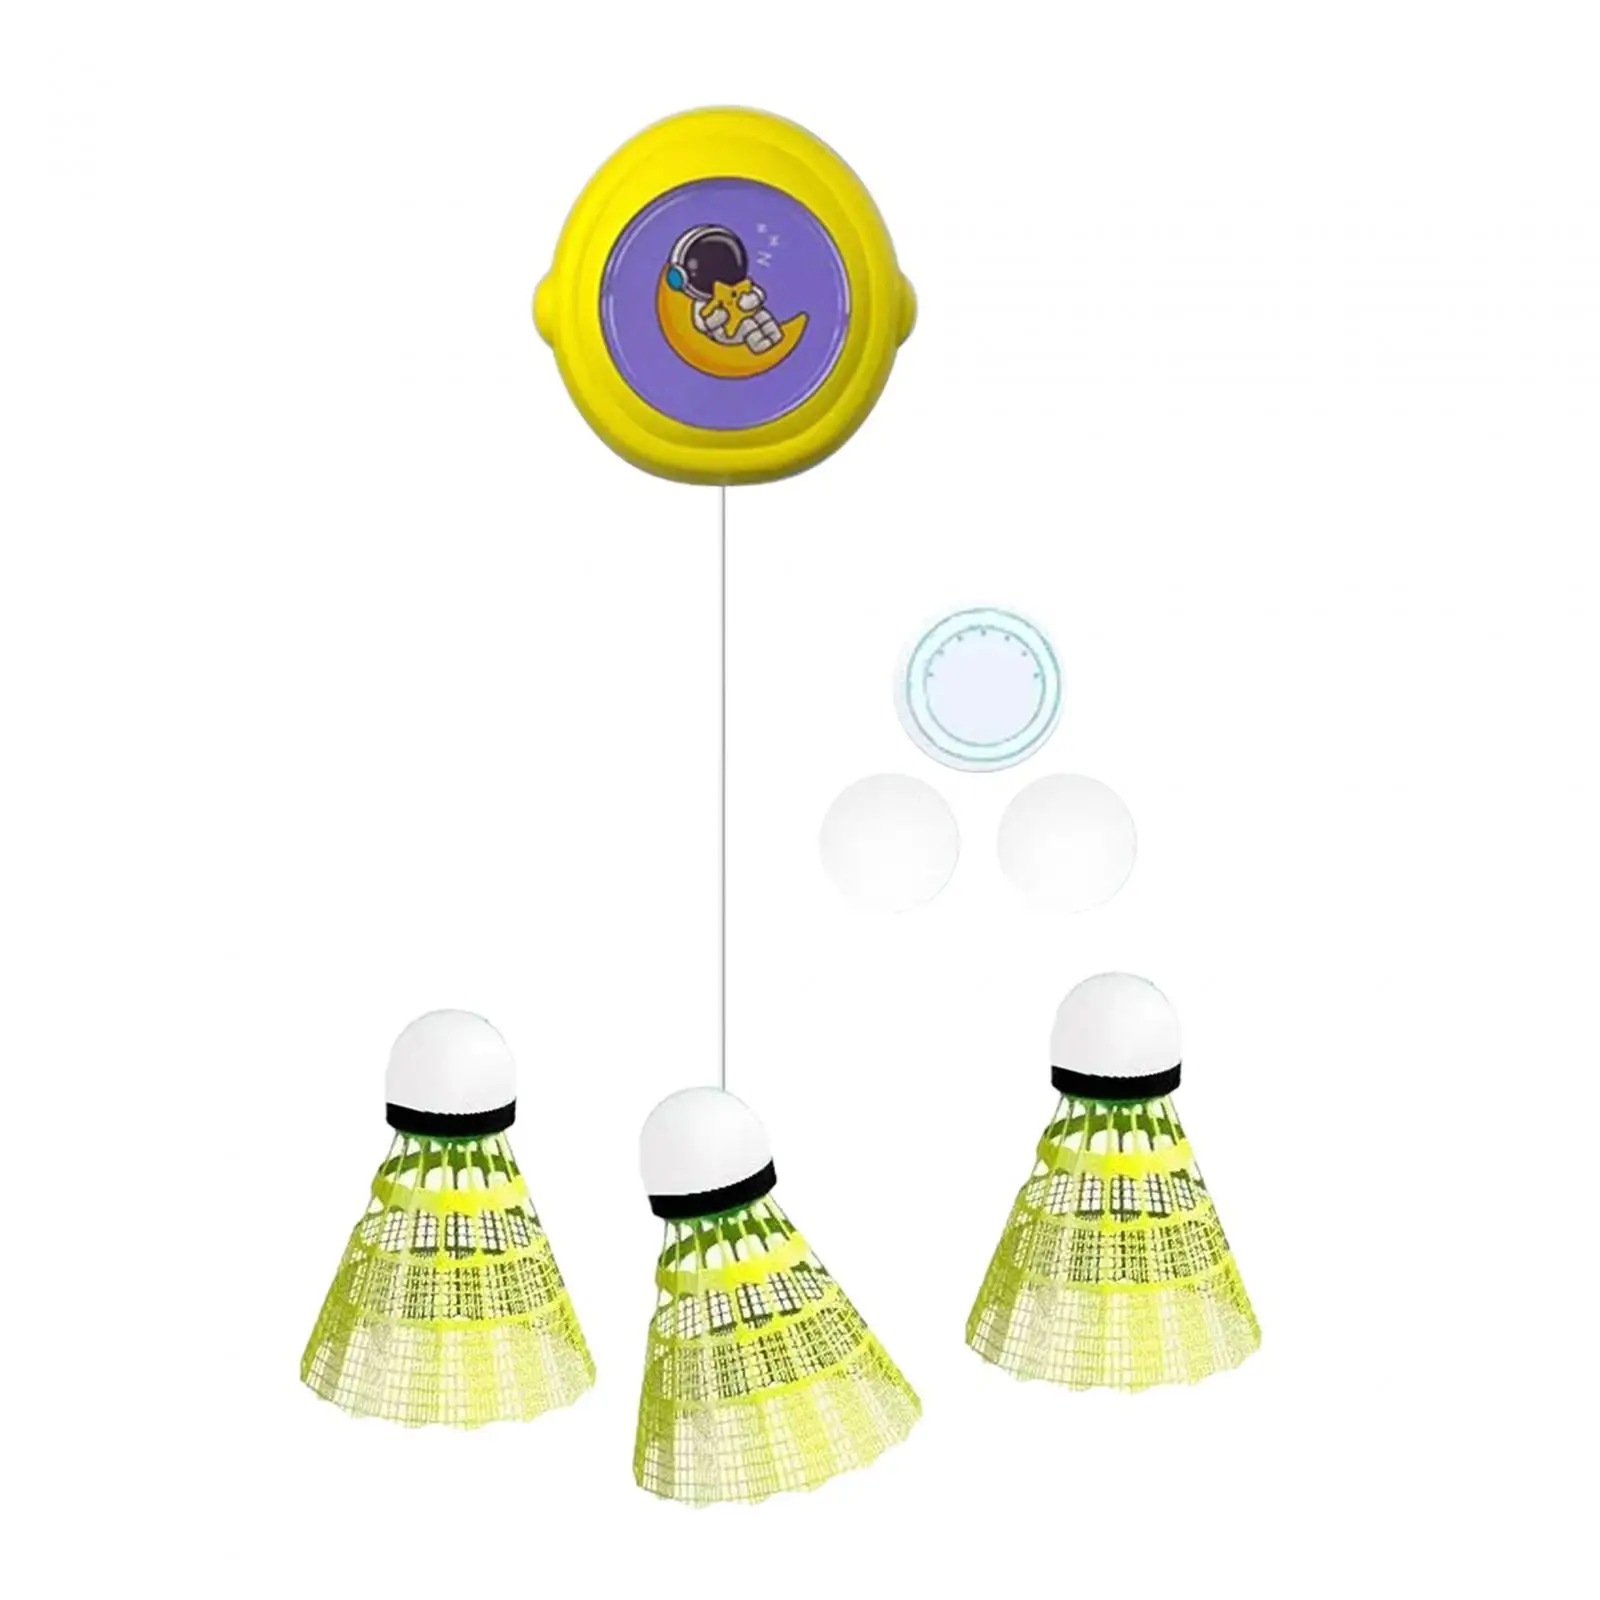 Badminton Solo Trainer Parent Child Toy No Need Table Badminton Training Device for Game Exercise Sports Activity Workout